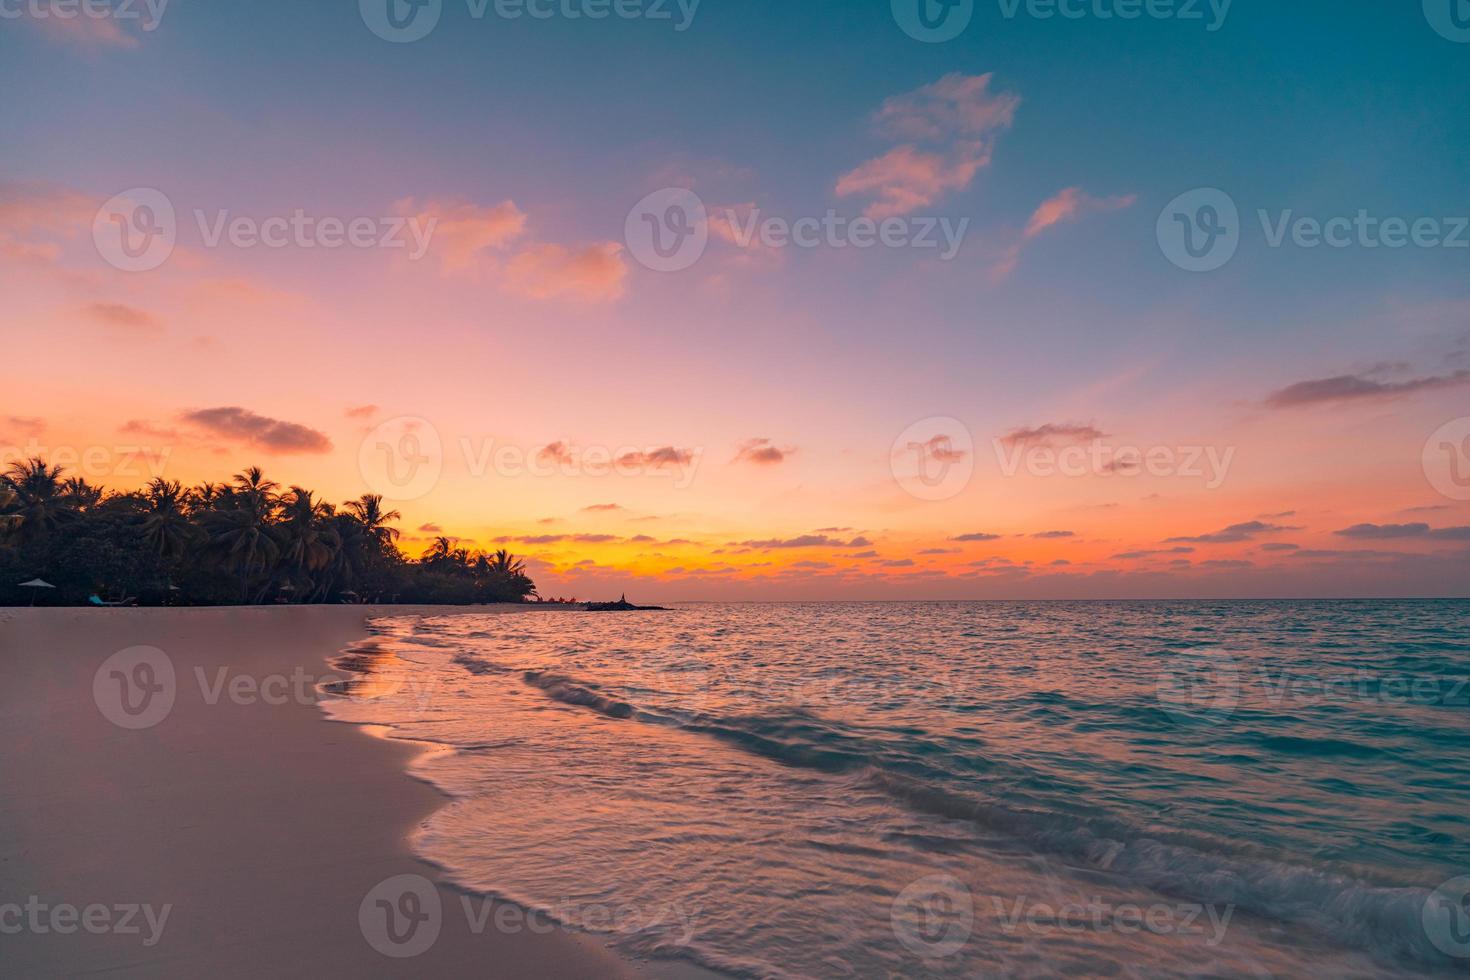 Sunset island beach. Paradise landscape beach. Tropical nature sea sand sky with palm tree forest silhouette and relaxing ocean water waves. Beautiful travel beach, sunrise over vacation destination photo